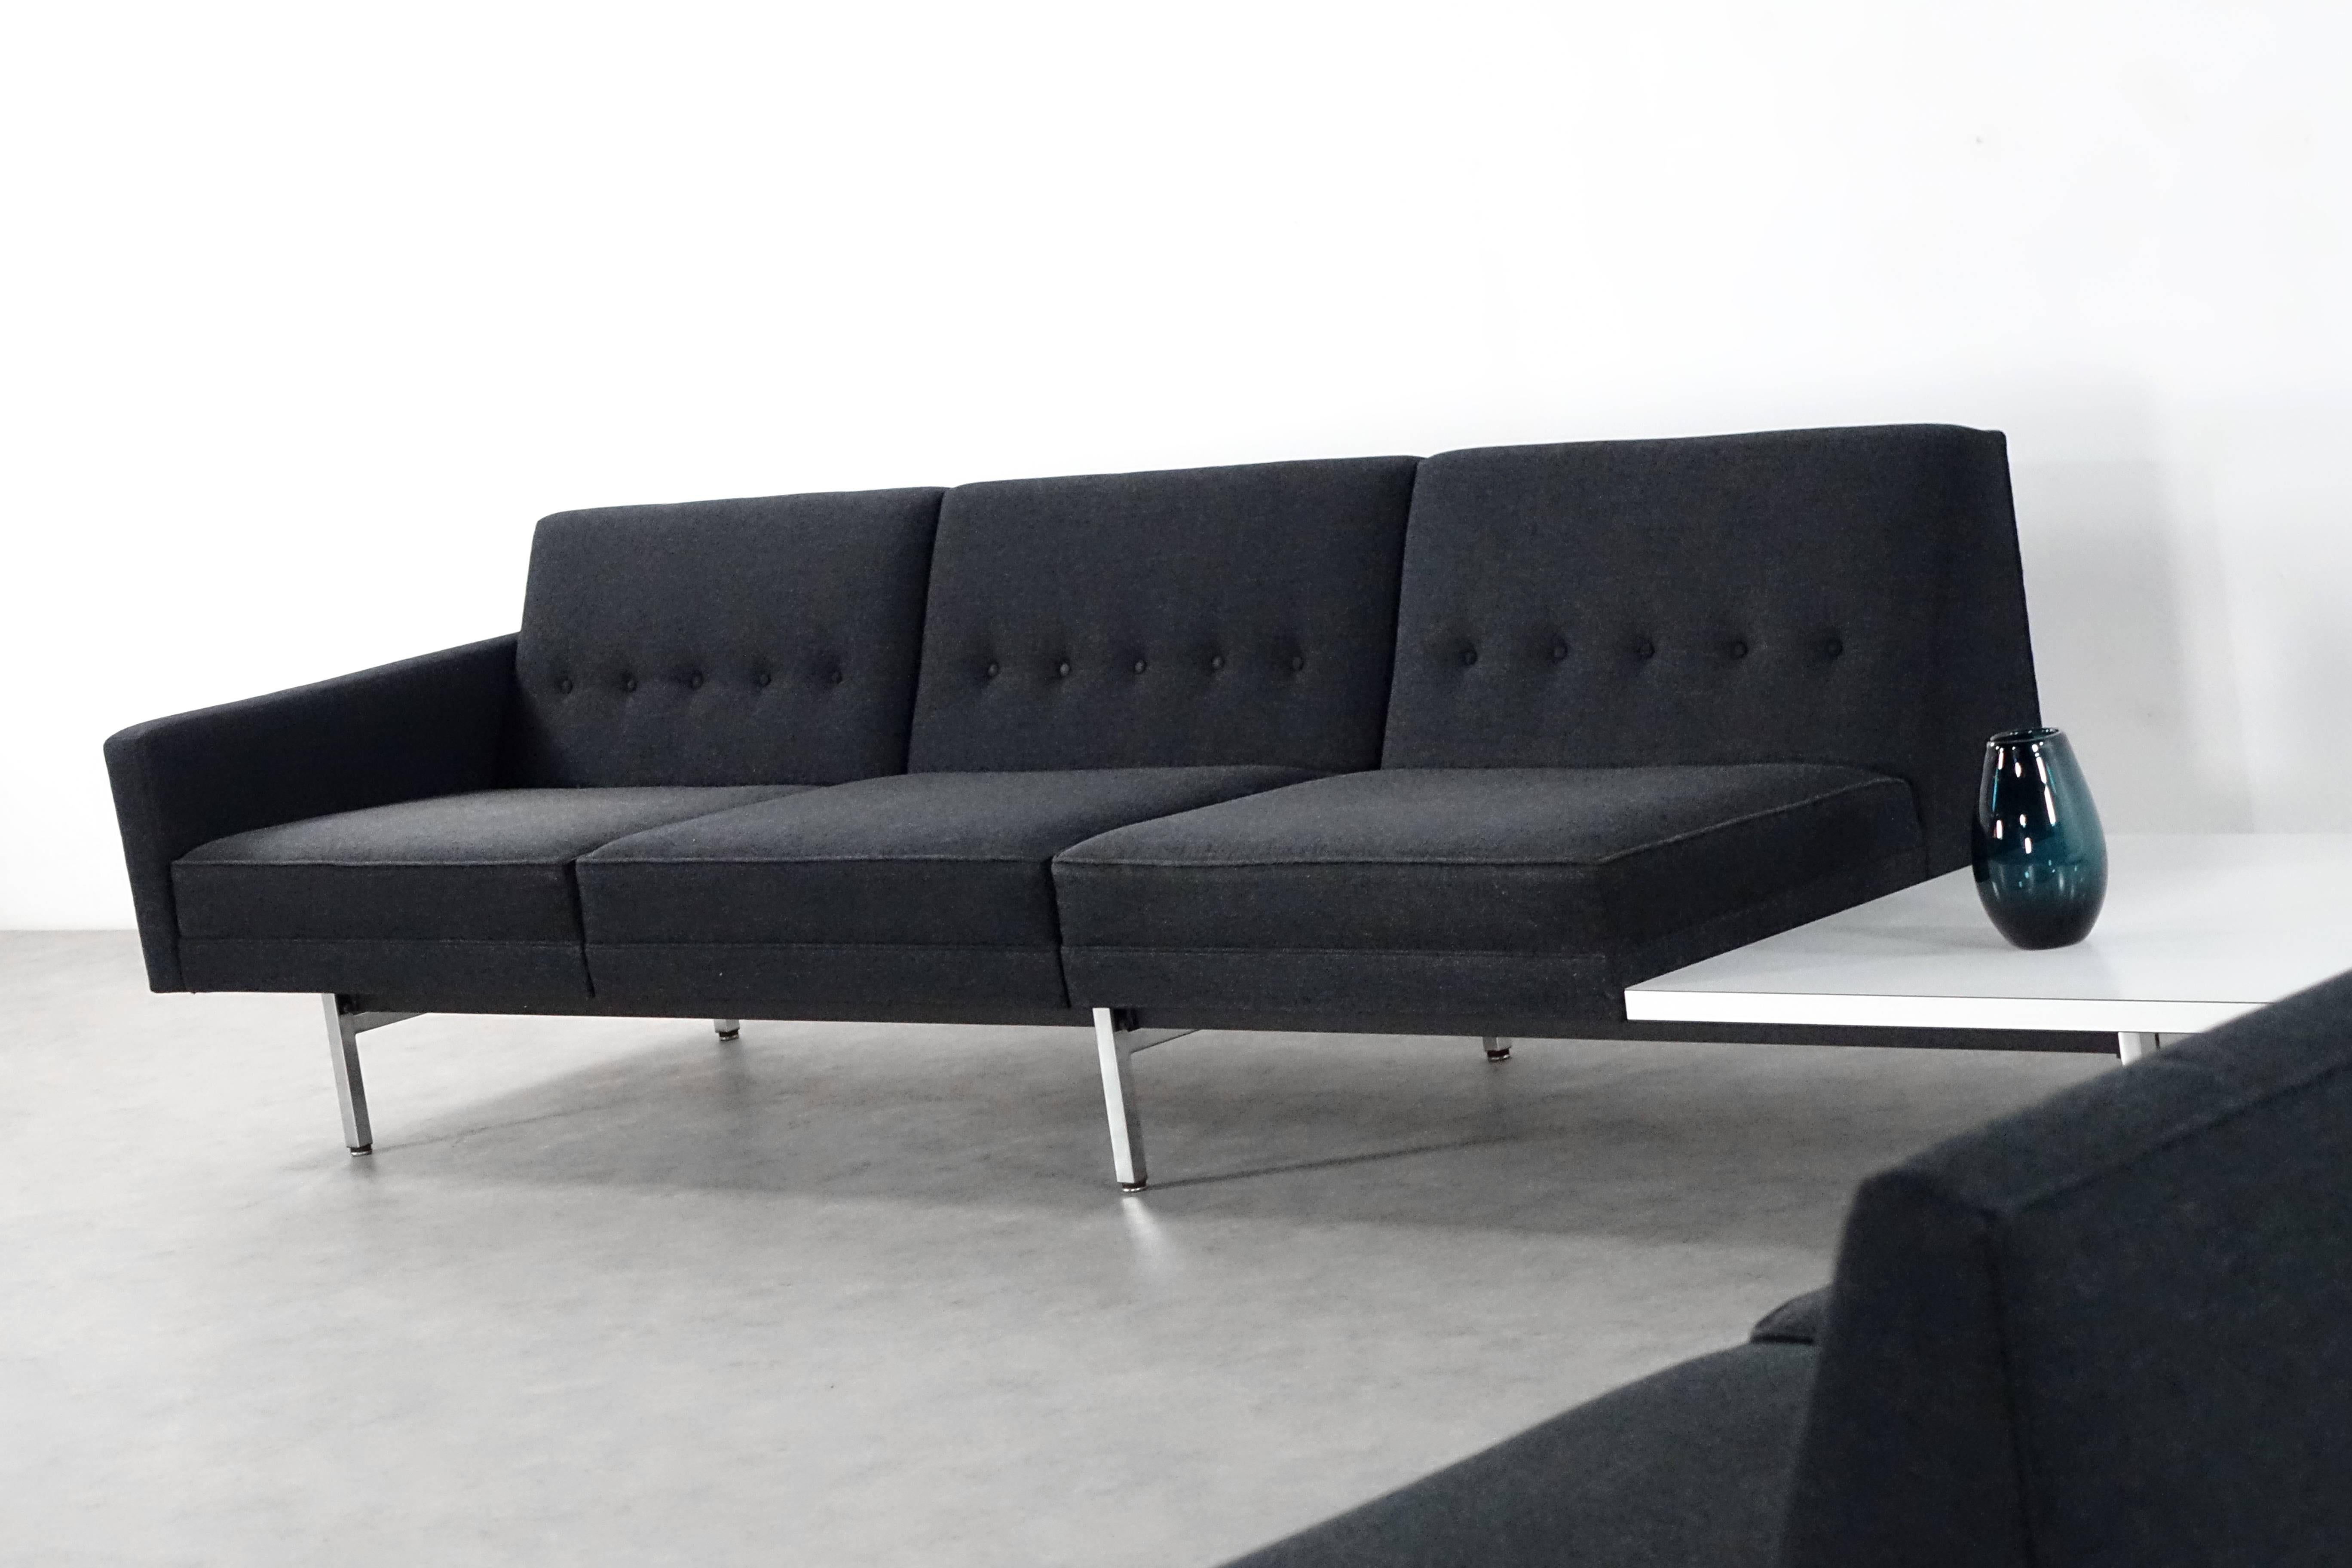 Modular System Seating Suite Sofa by George Nelson for Herman Miller Perfect 1